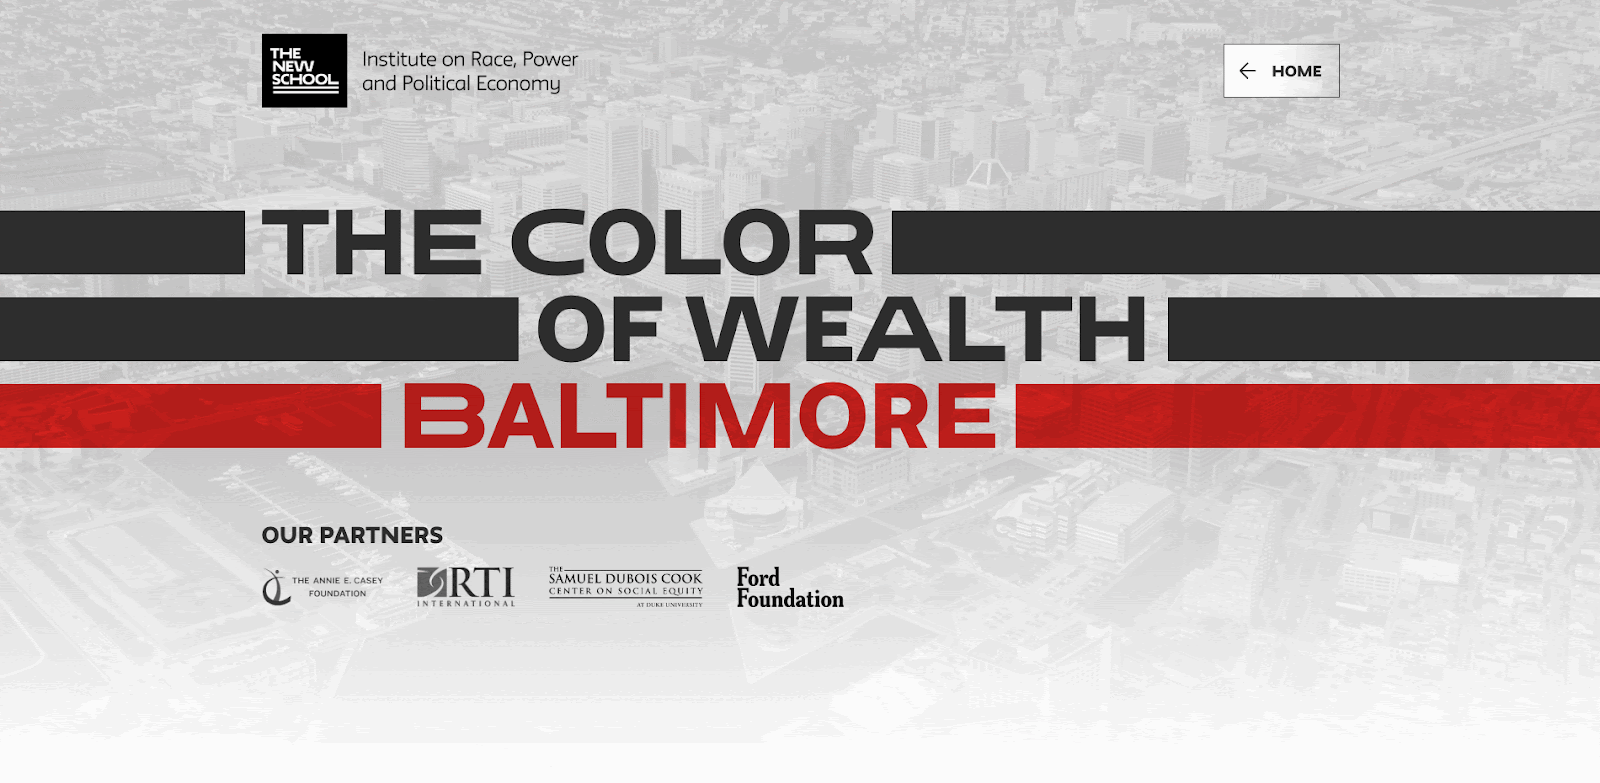 Cover pages for each City wealth story designed by Graphicacy for the Color of Wealth project